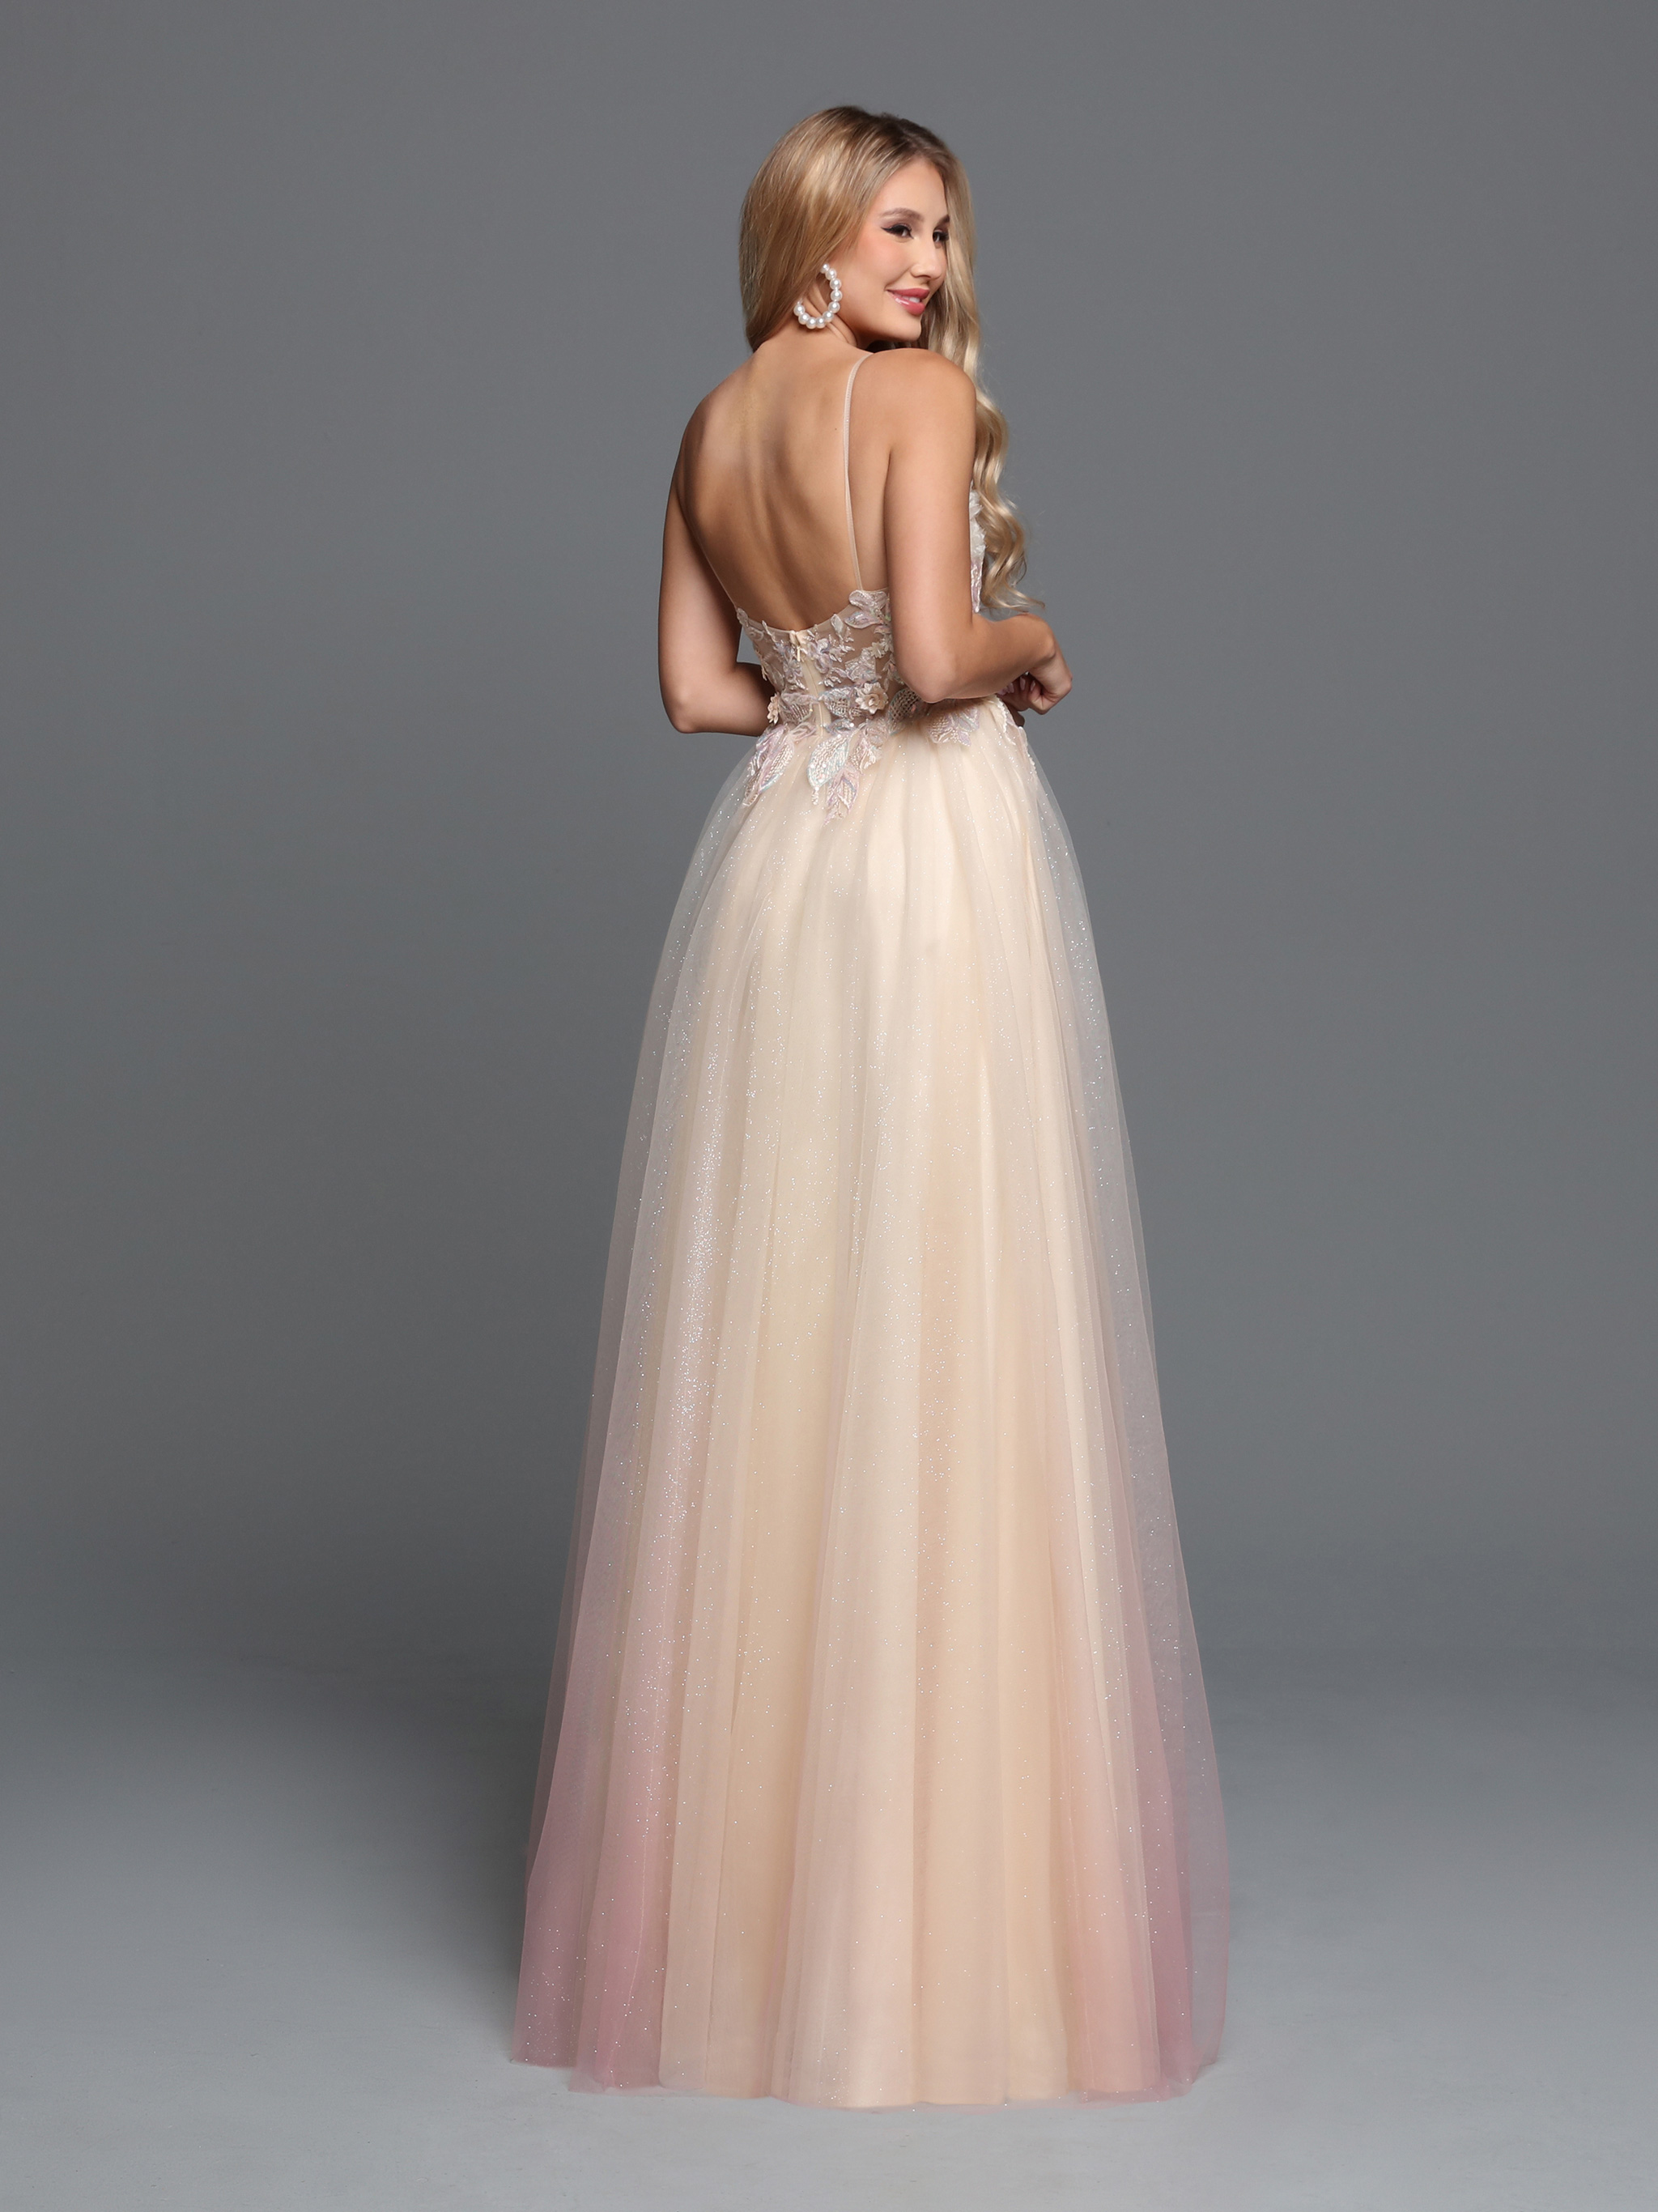 Image showing back view of style #72255